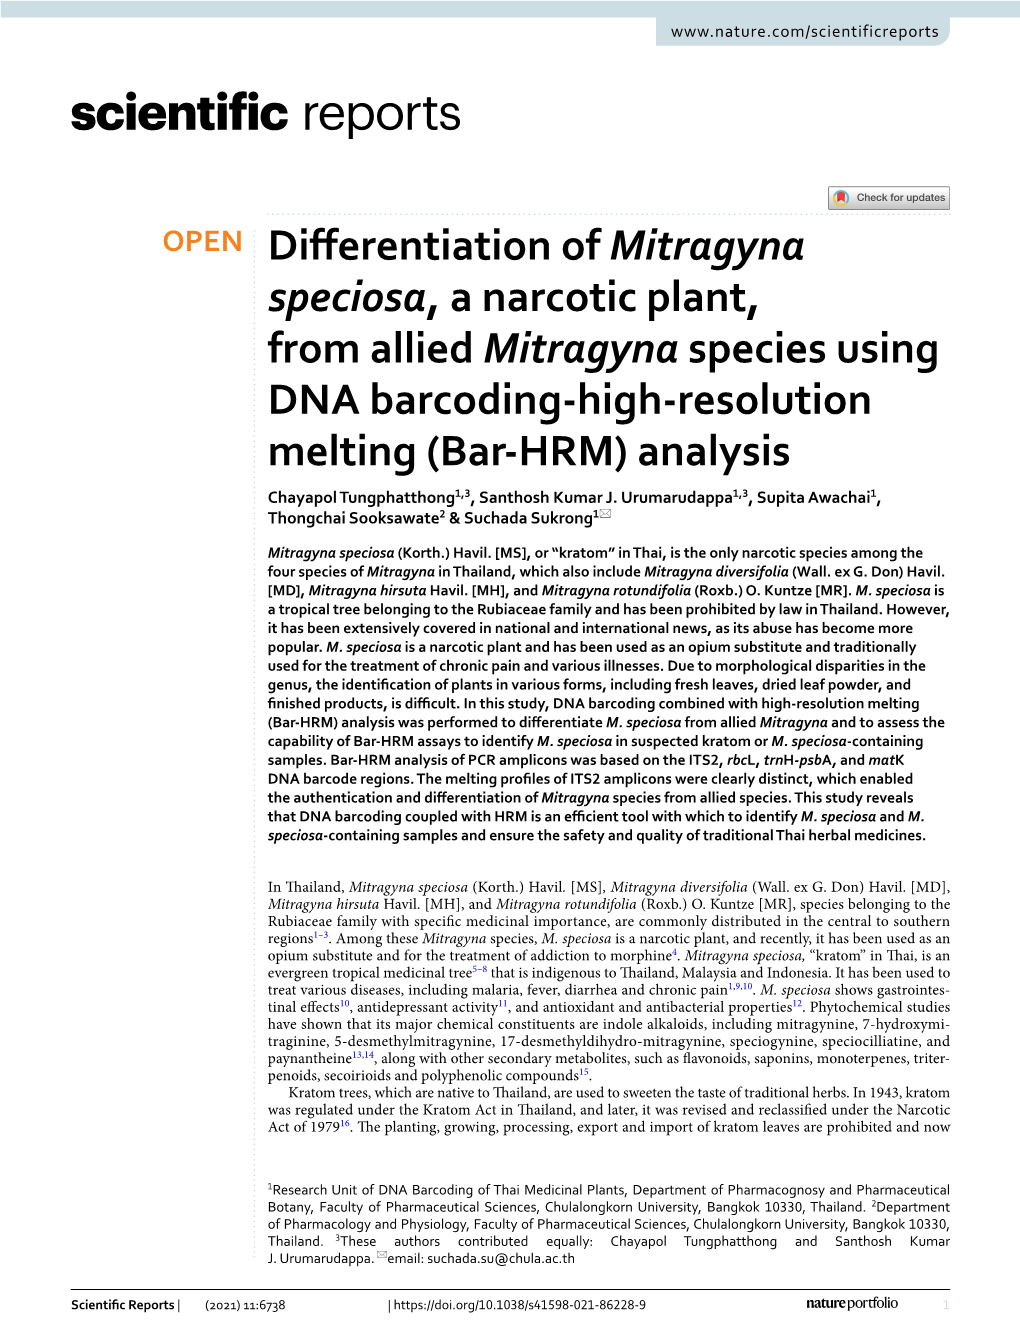 Differentiation of Mitragyna Speciosa, a Narcotic Plant, from Allied Mitragyna Species Using DNA Barcoding-High-Resolution Melti